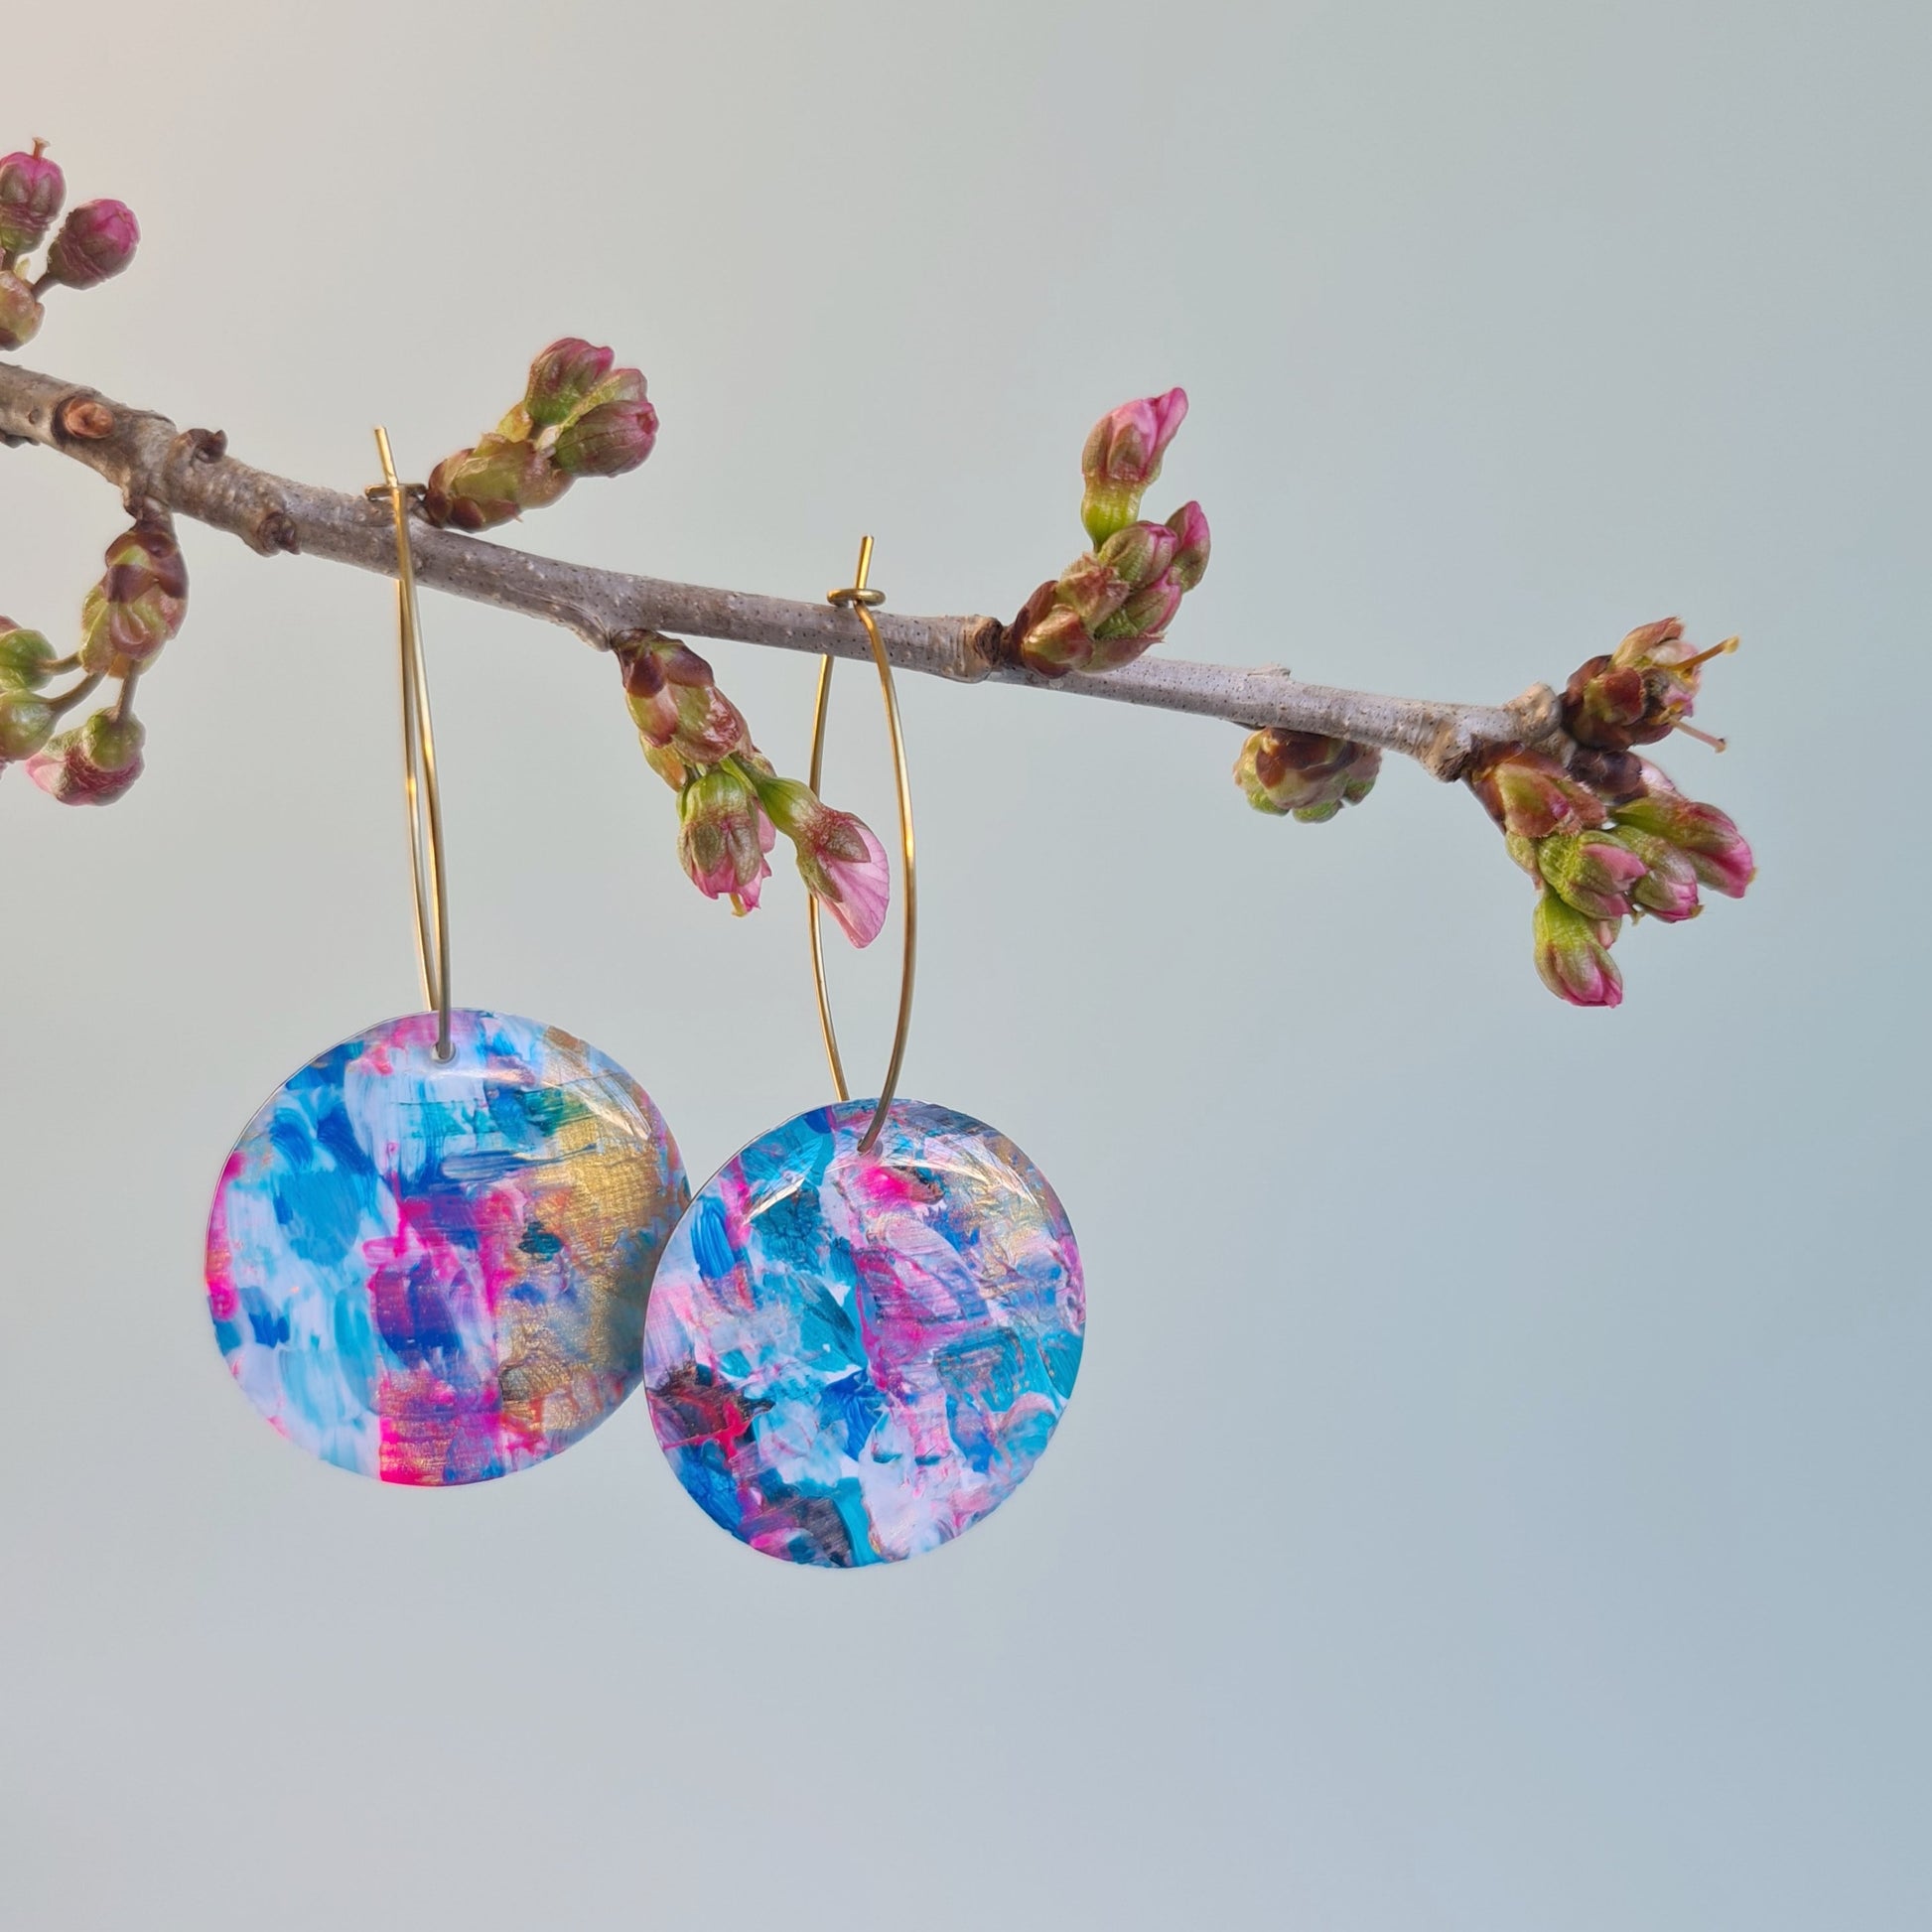 Dangly earrings from The Joyful Rebel - hand painted resin with oval brass ear wire.